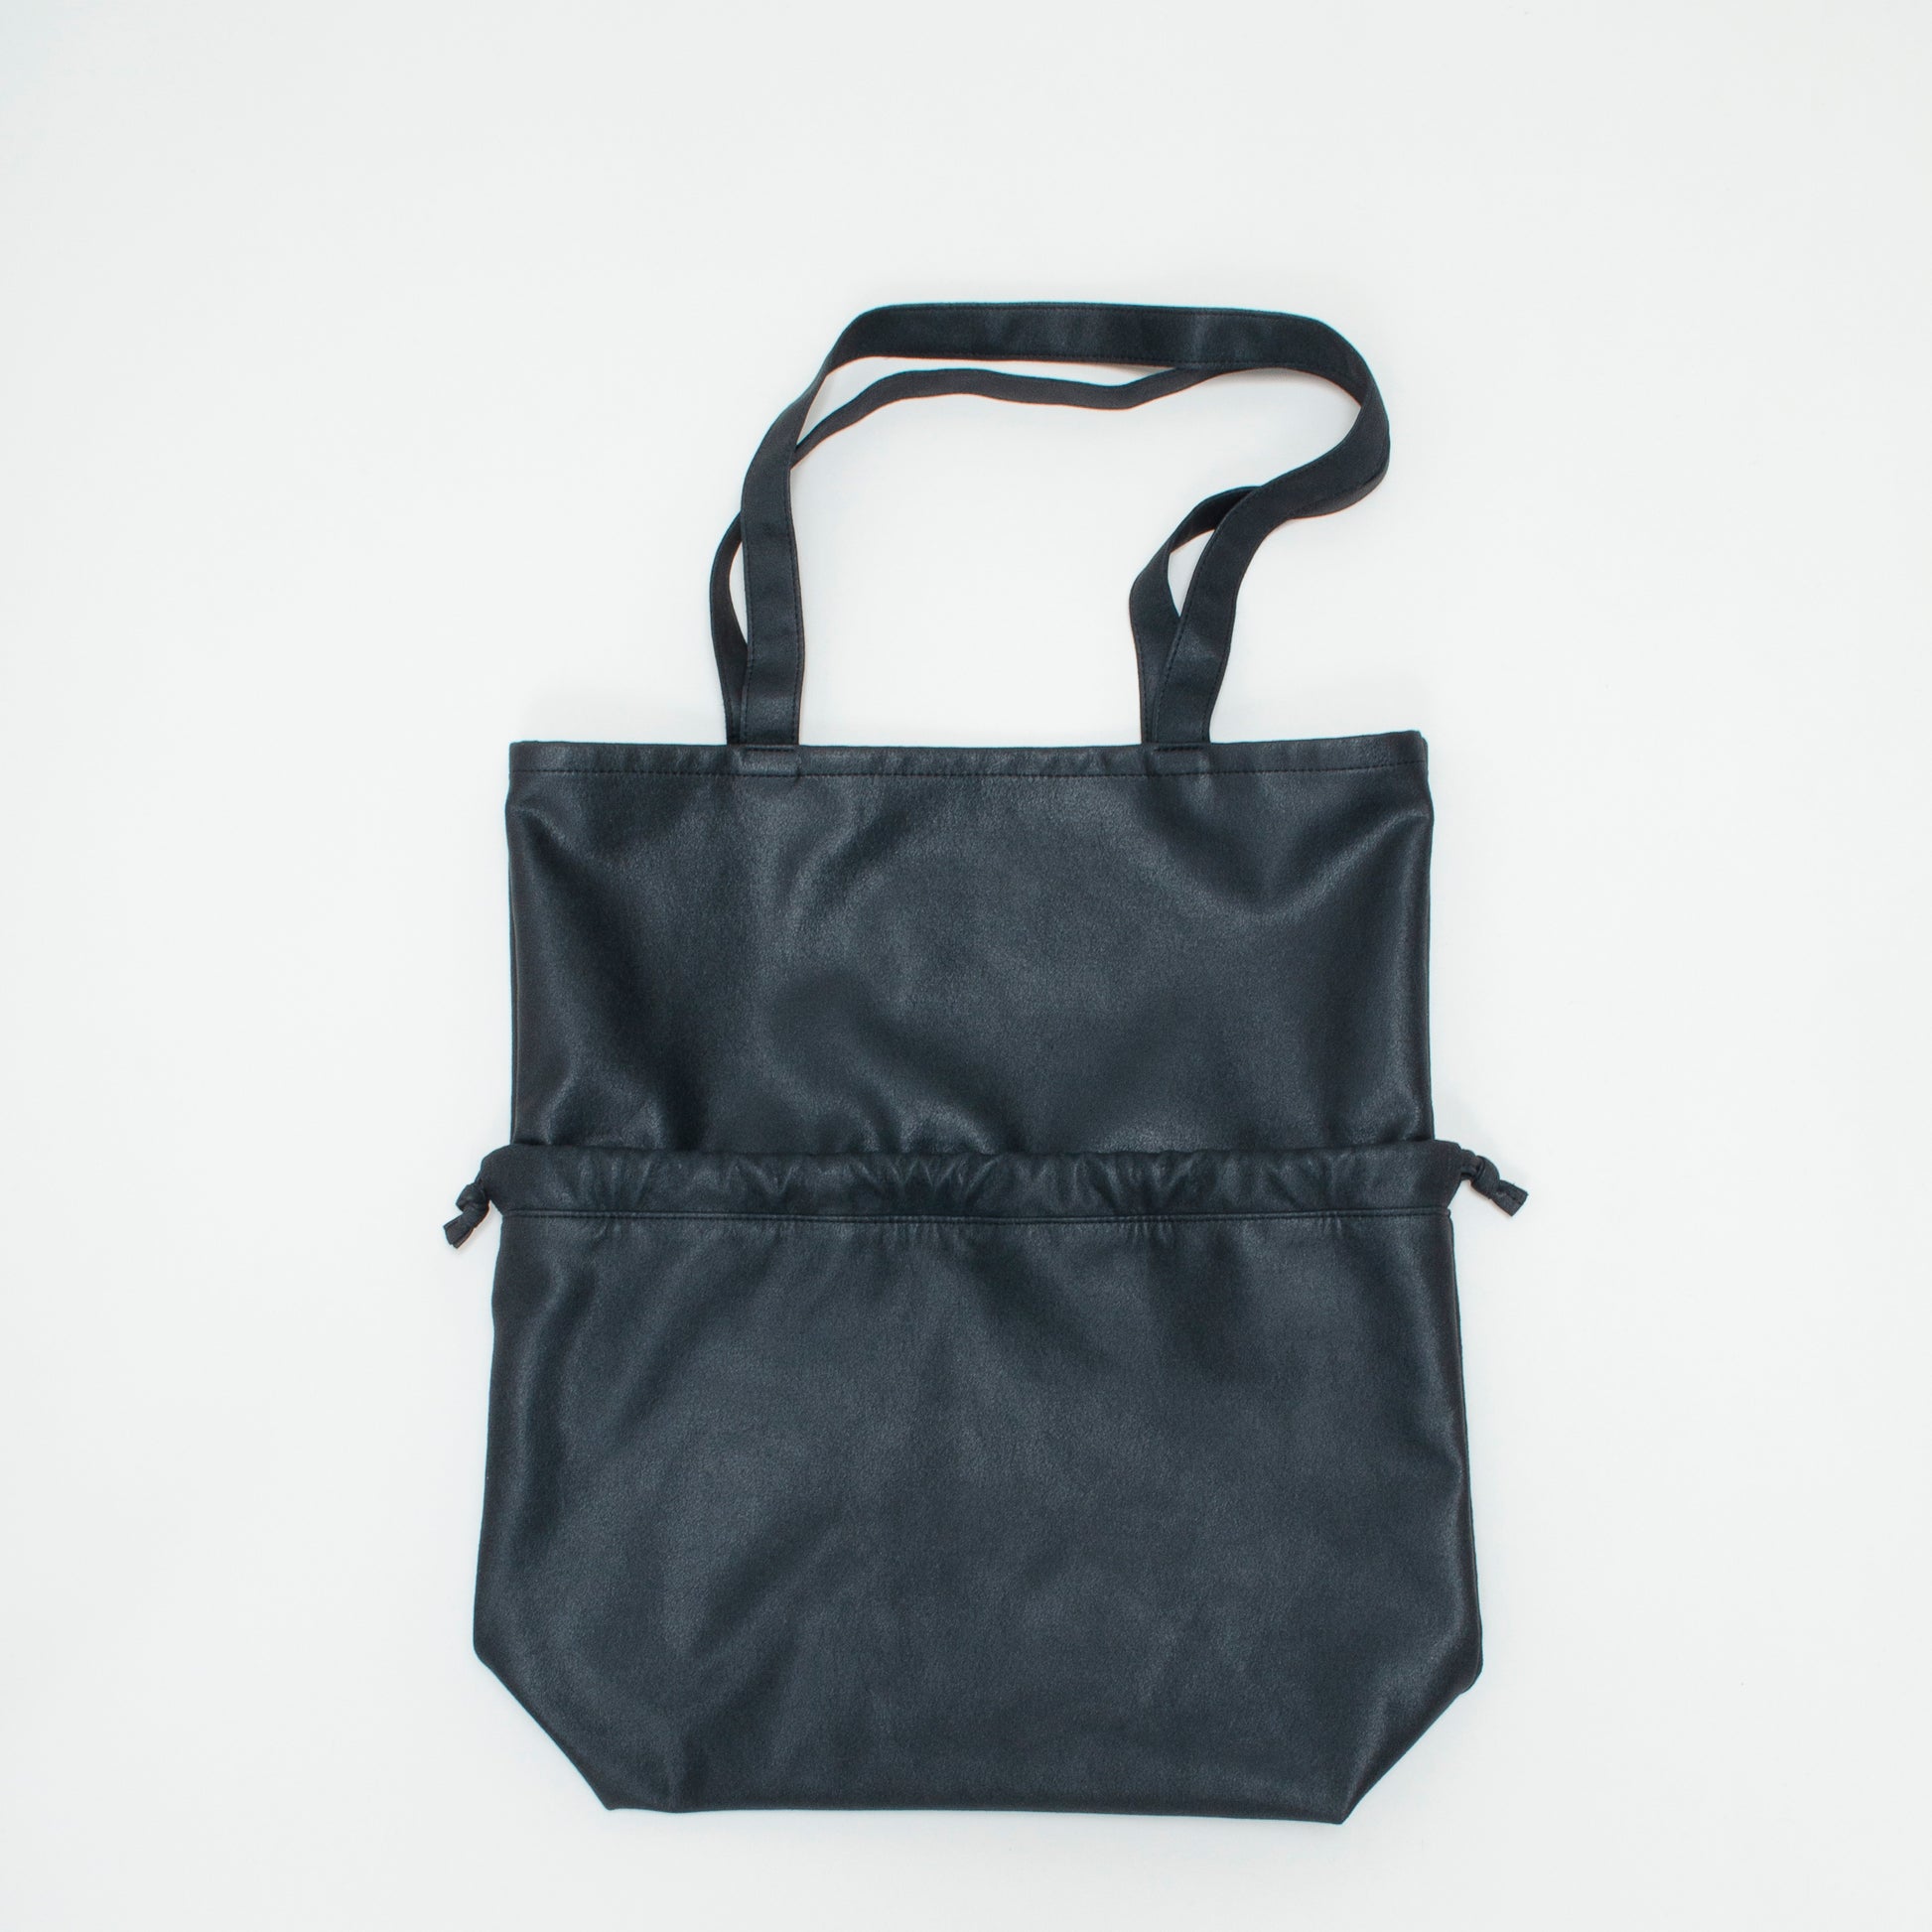 KaILI （カイリ）NOT COMPACT ECOBAG UN検討させていただきます